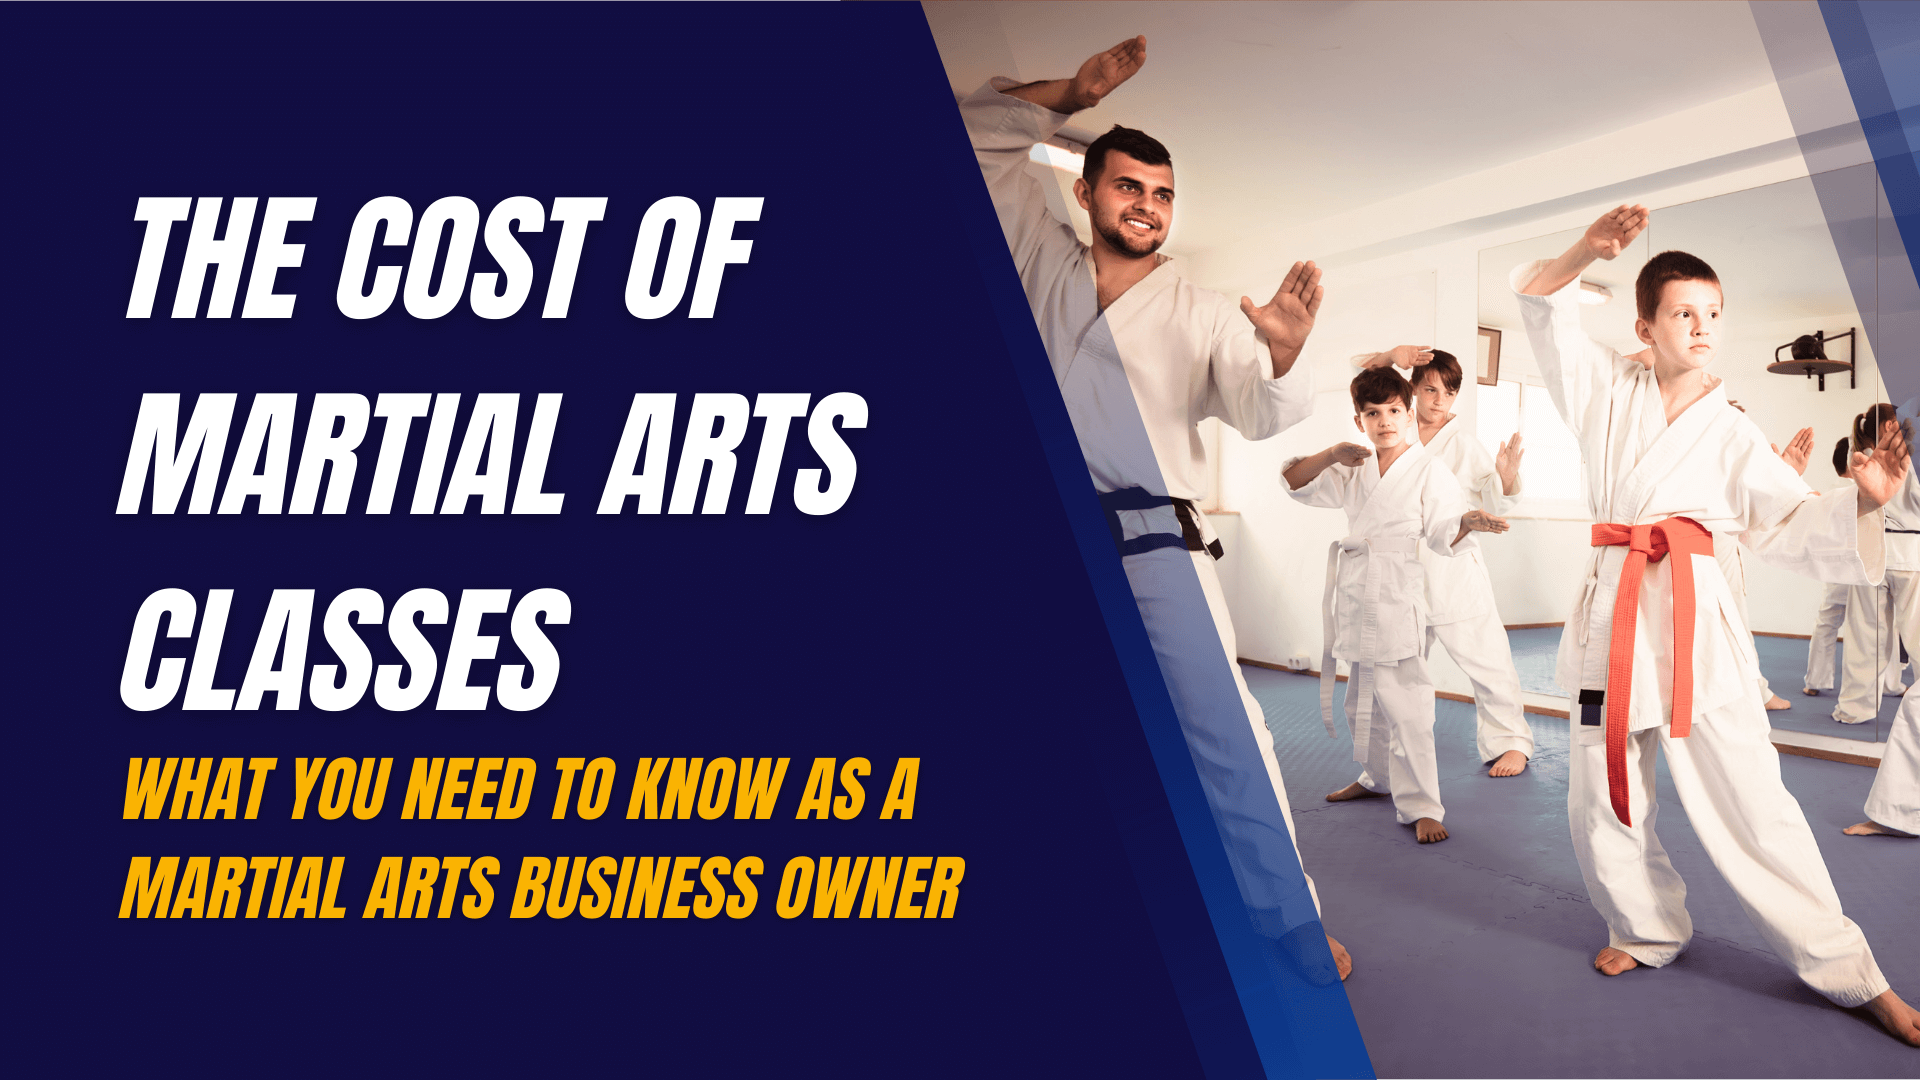 The Cost of Martial Arts Classes: What You Need to Know as a Martial Arts Business Owner